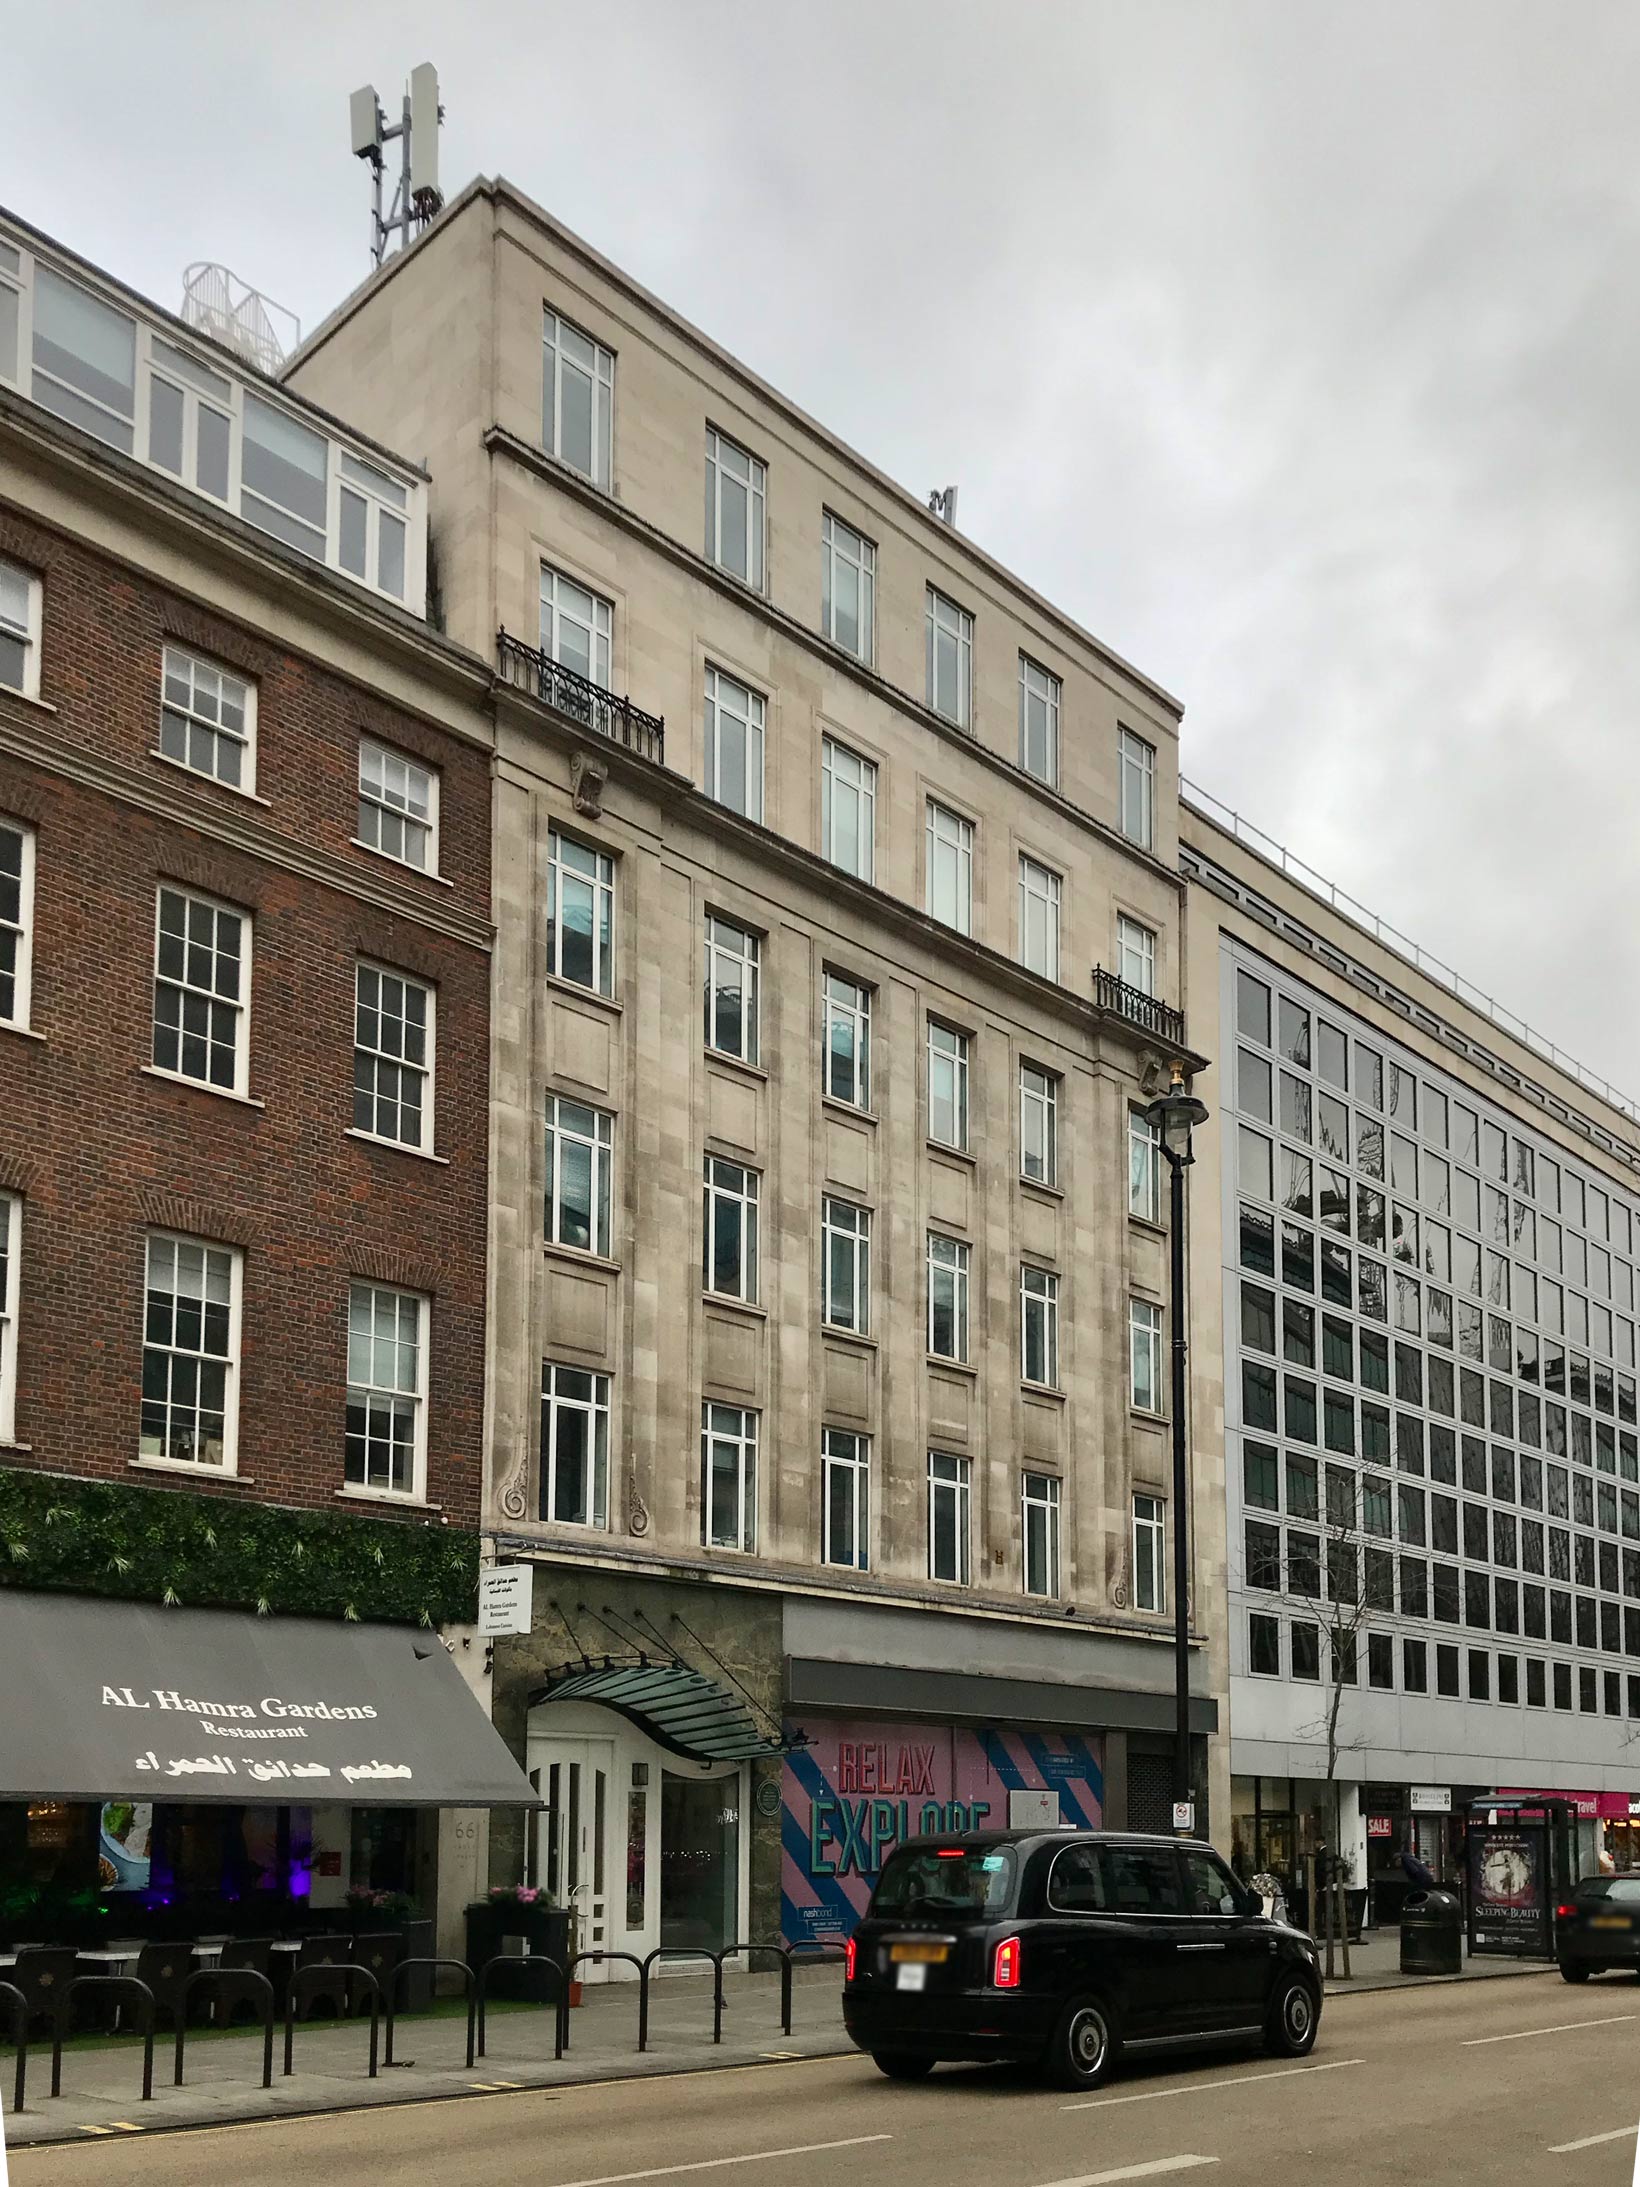 50 Baker Street is moved to developments